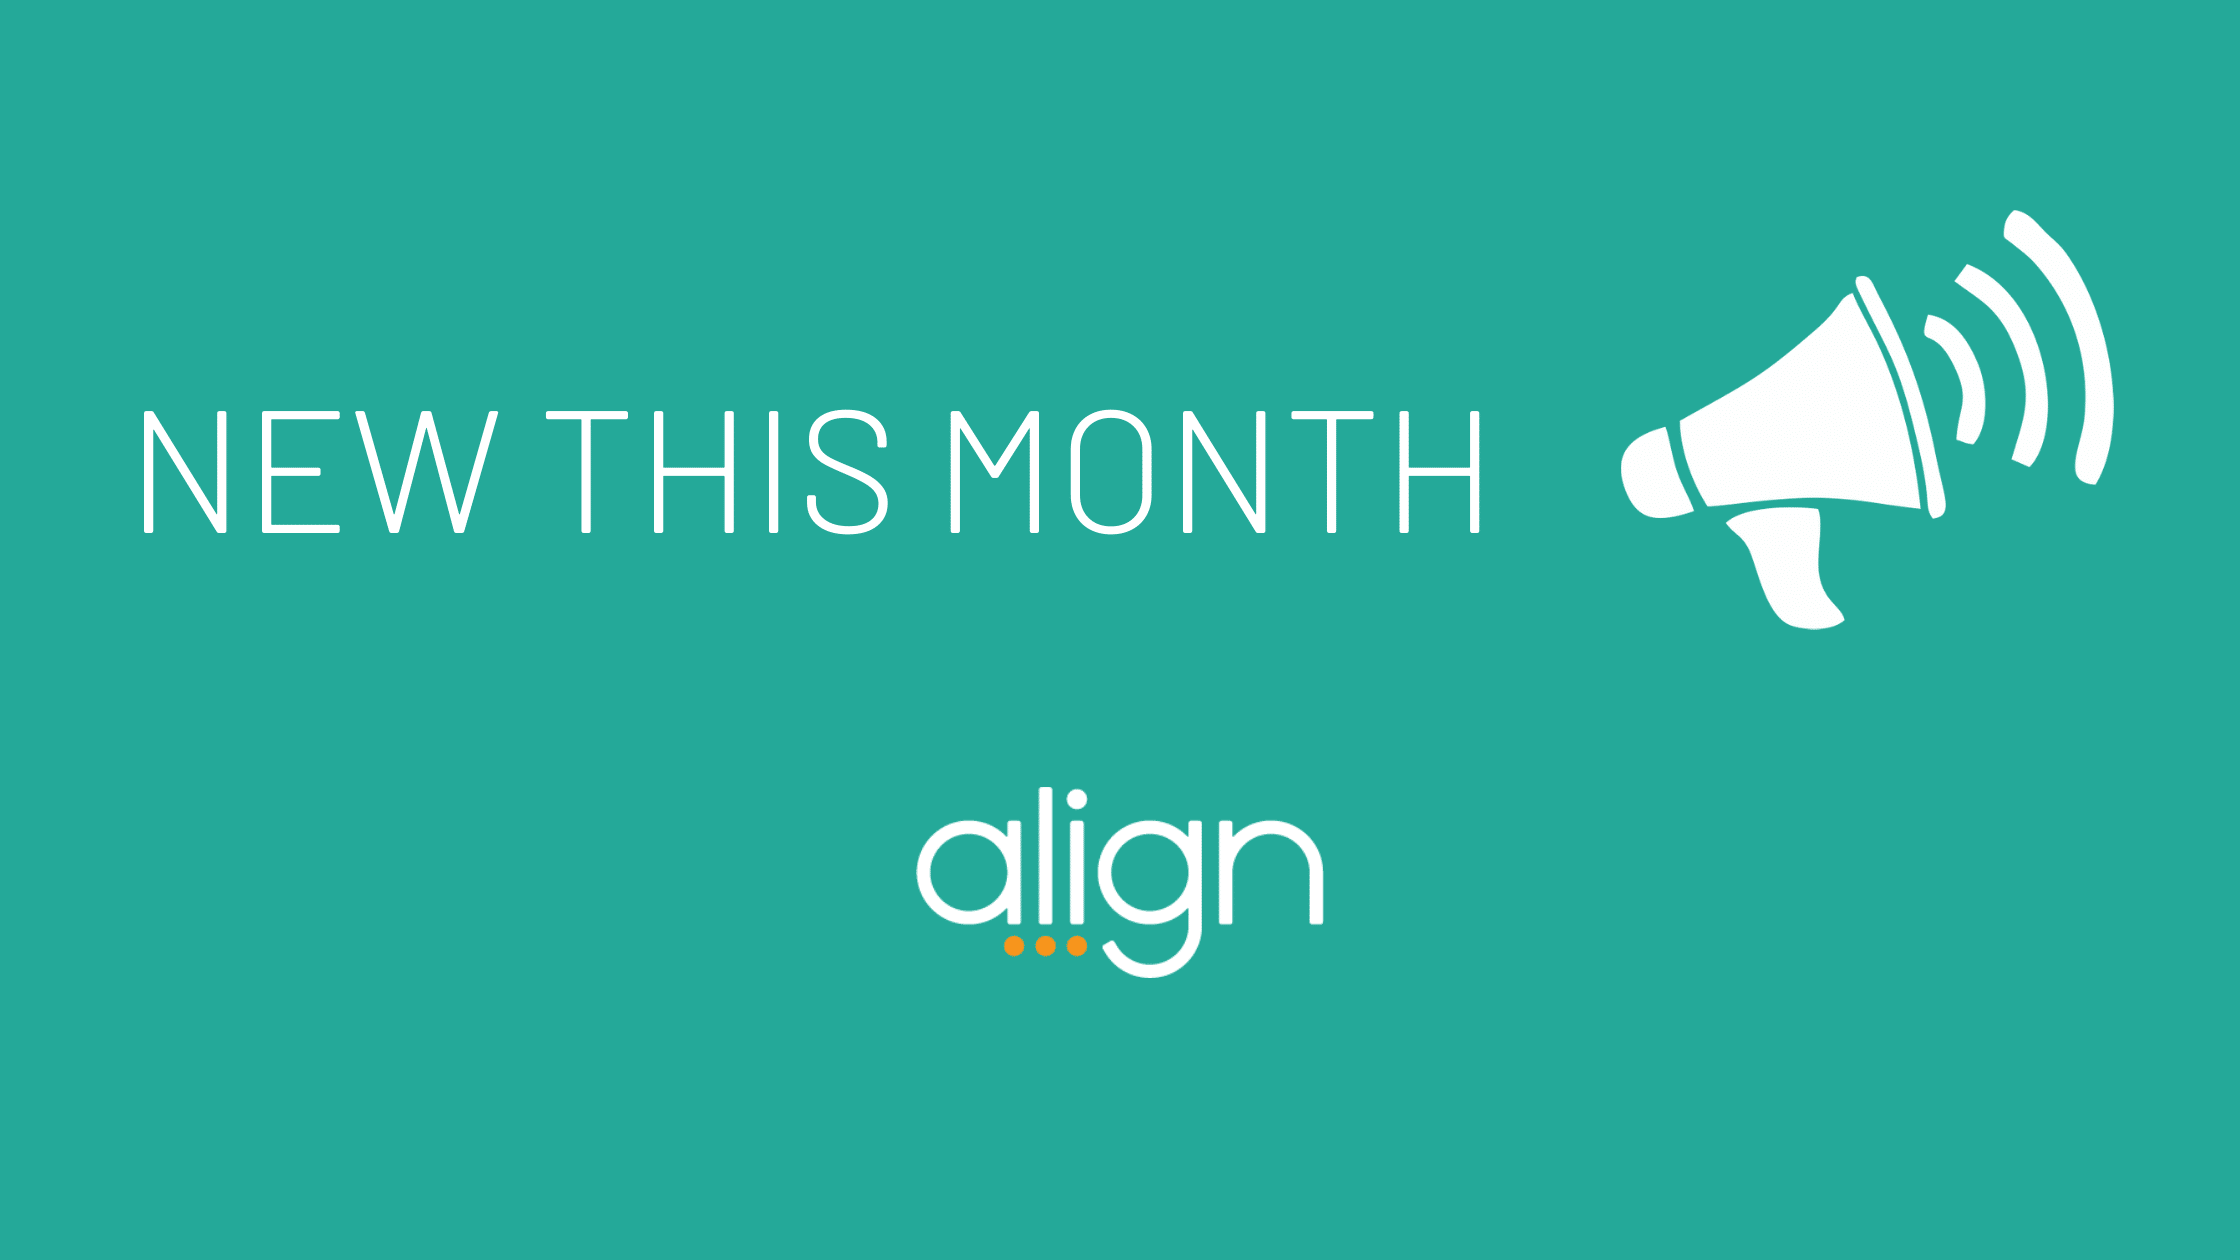 Teal banner with white text stating "New This Month" next to a white megaphone and the align logo.